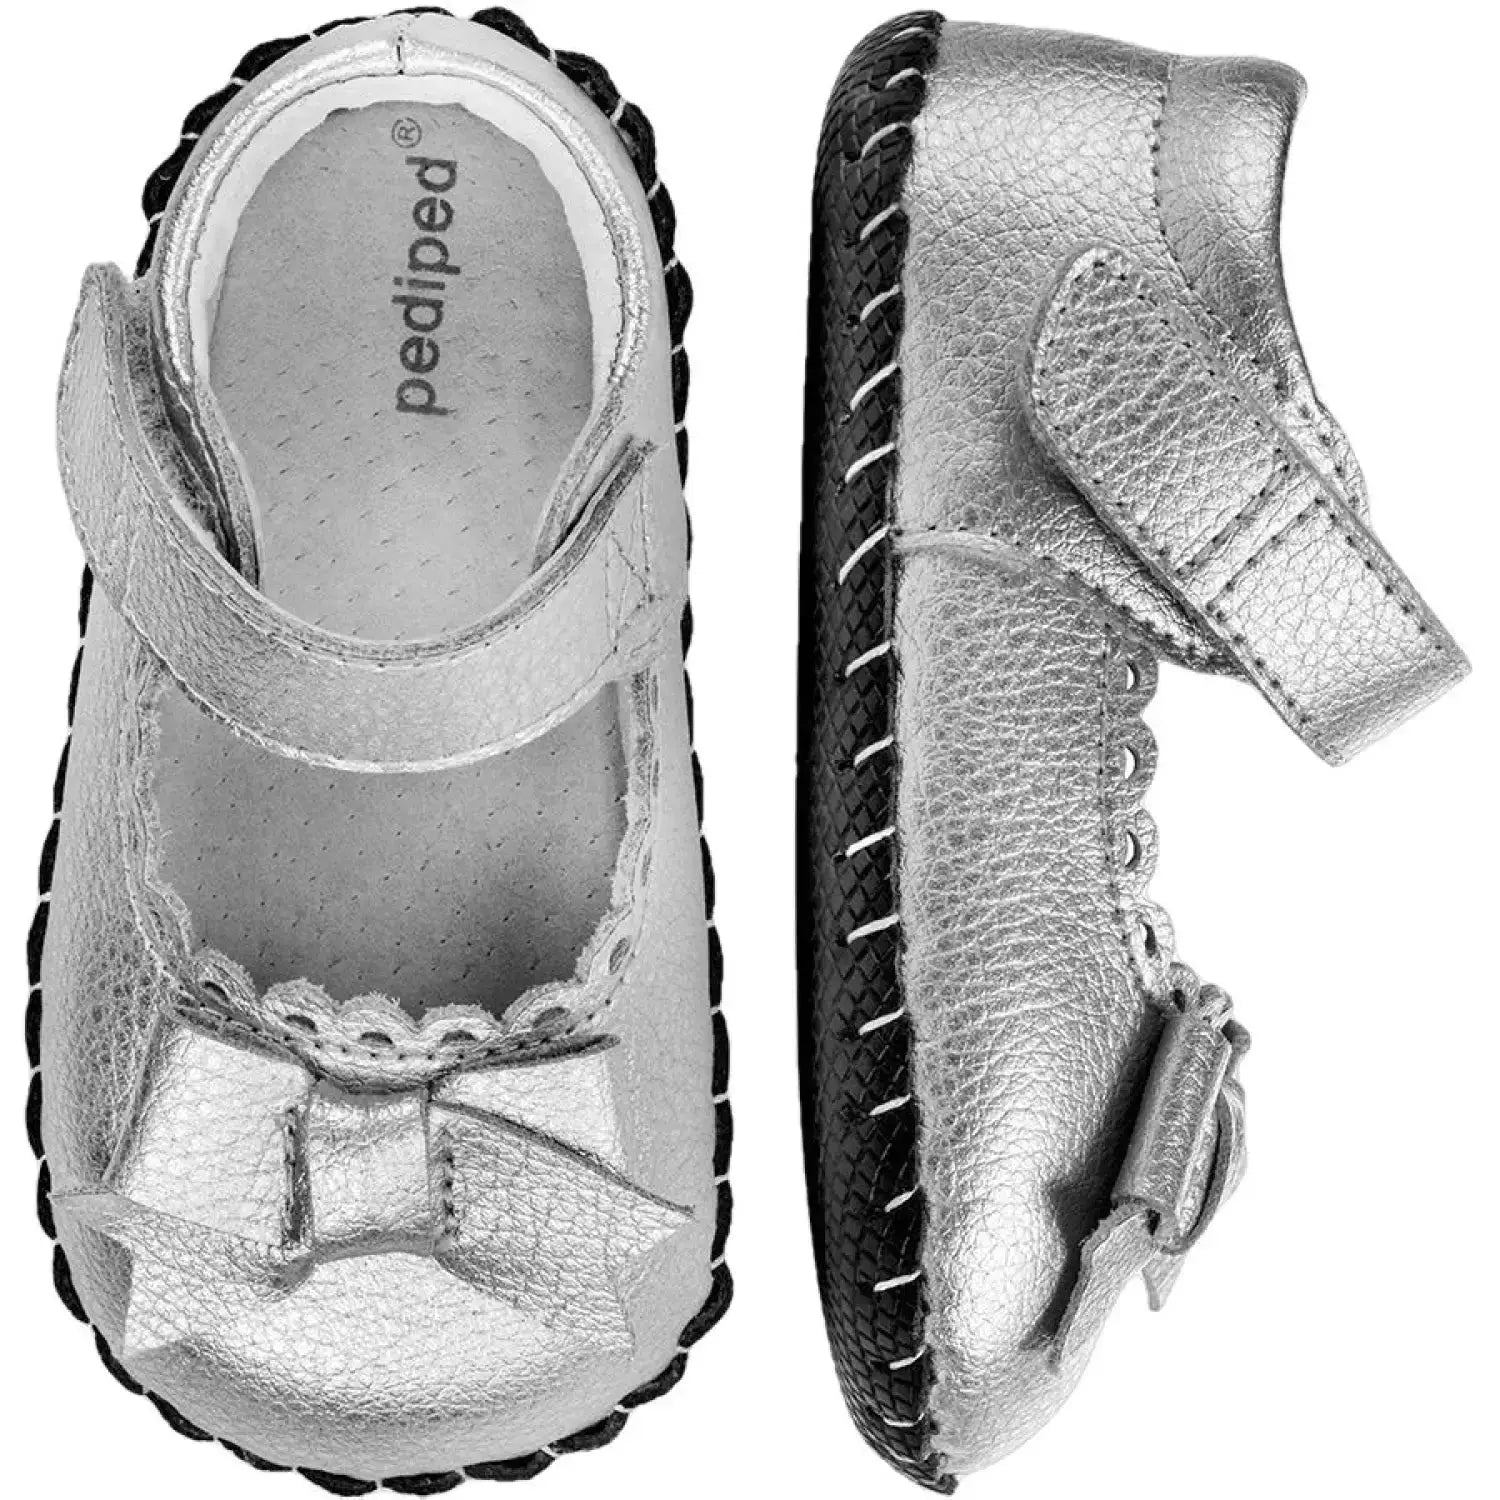 Pediped Originals® Betty Silver color, top view and side view shown.  Silver upper with bow on top, and black sole.